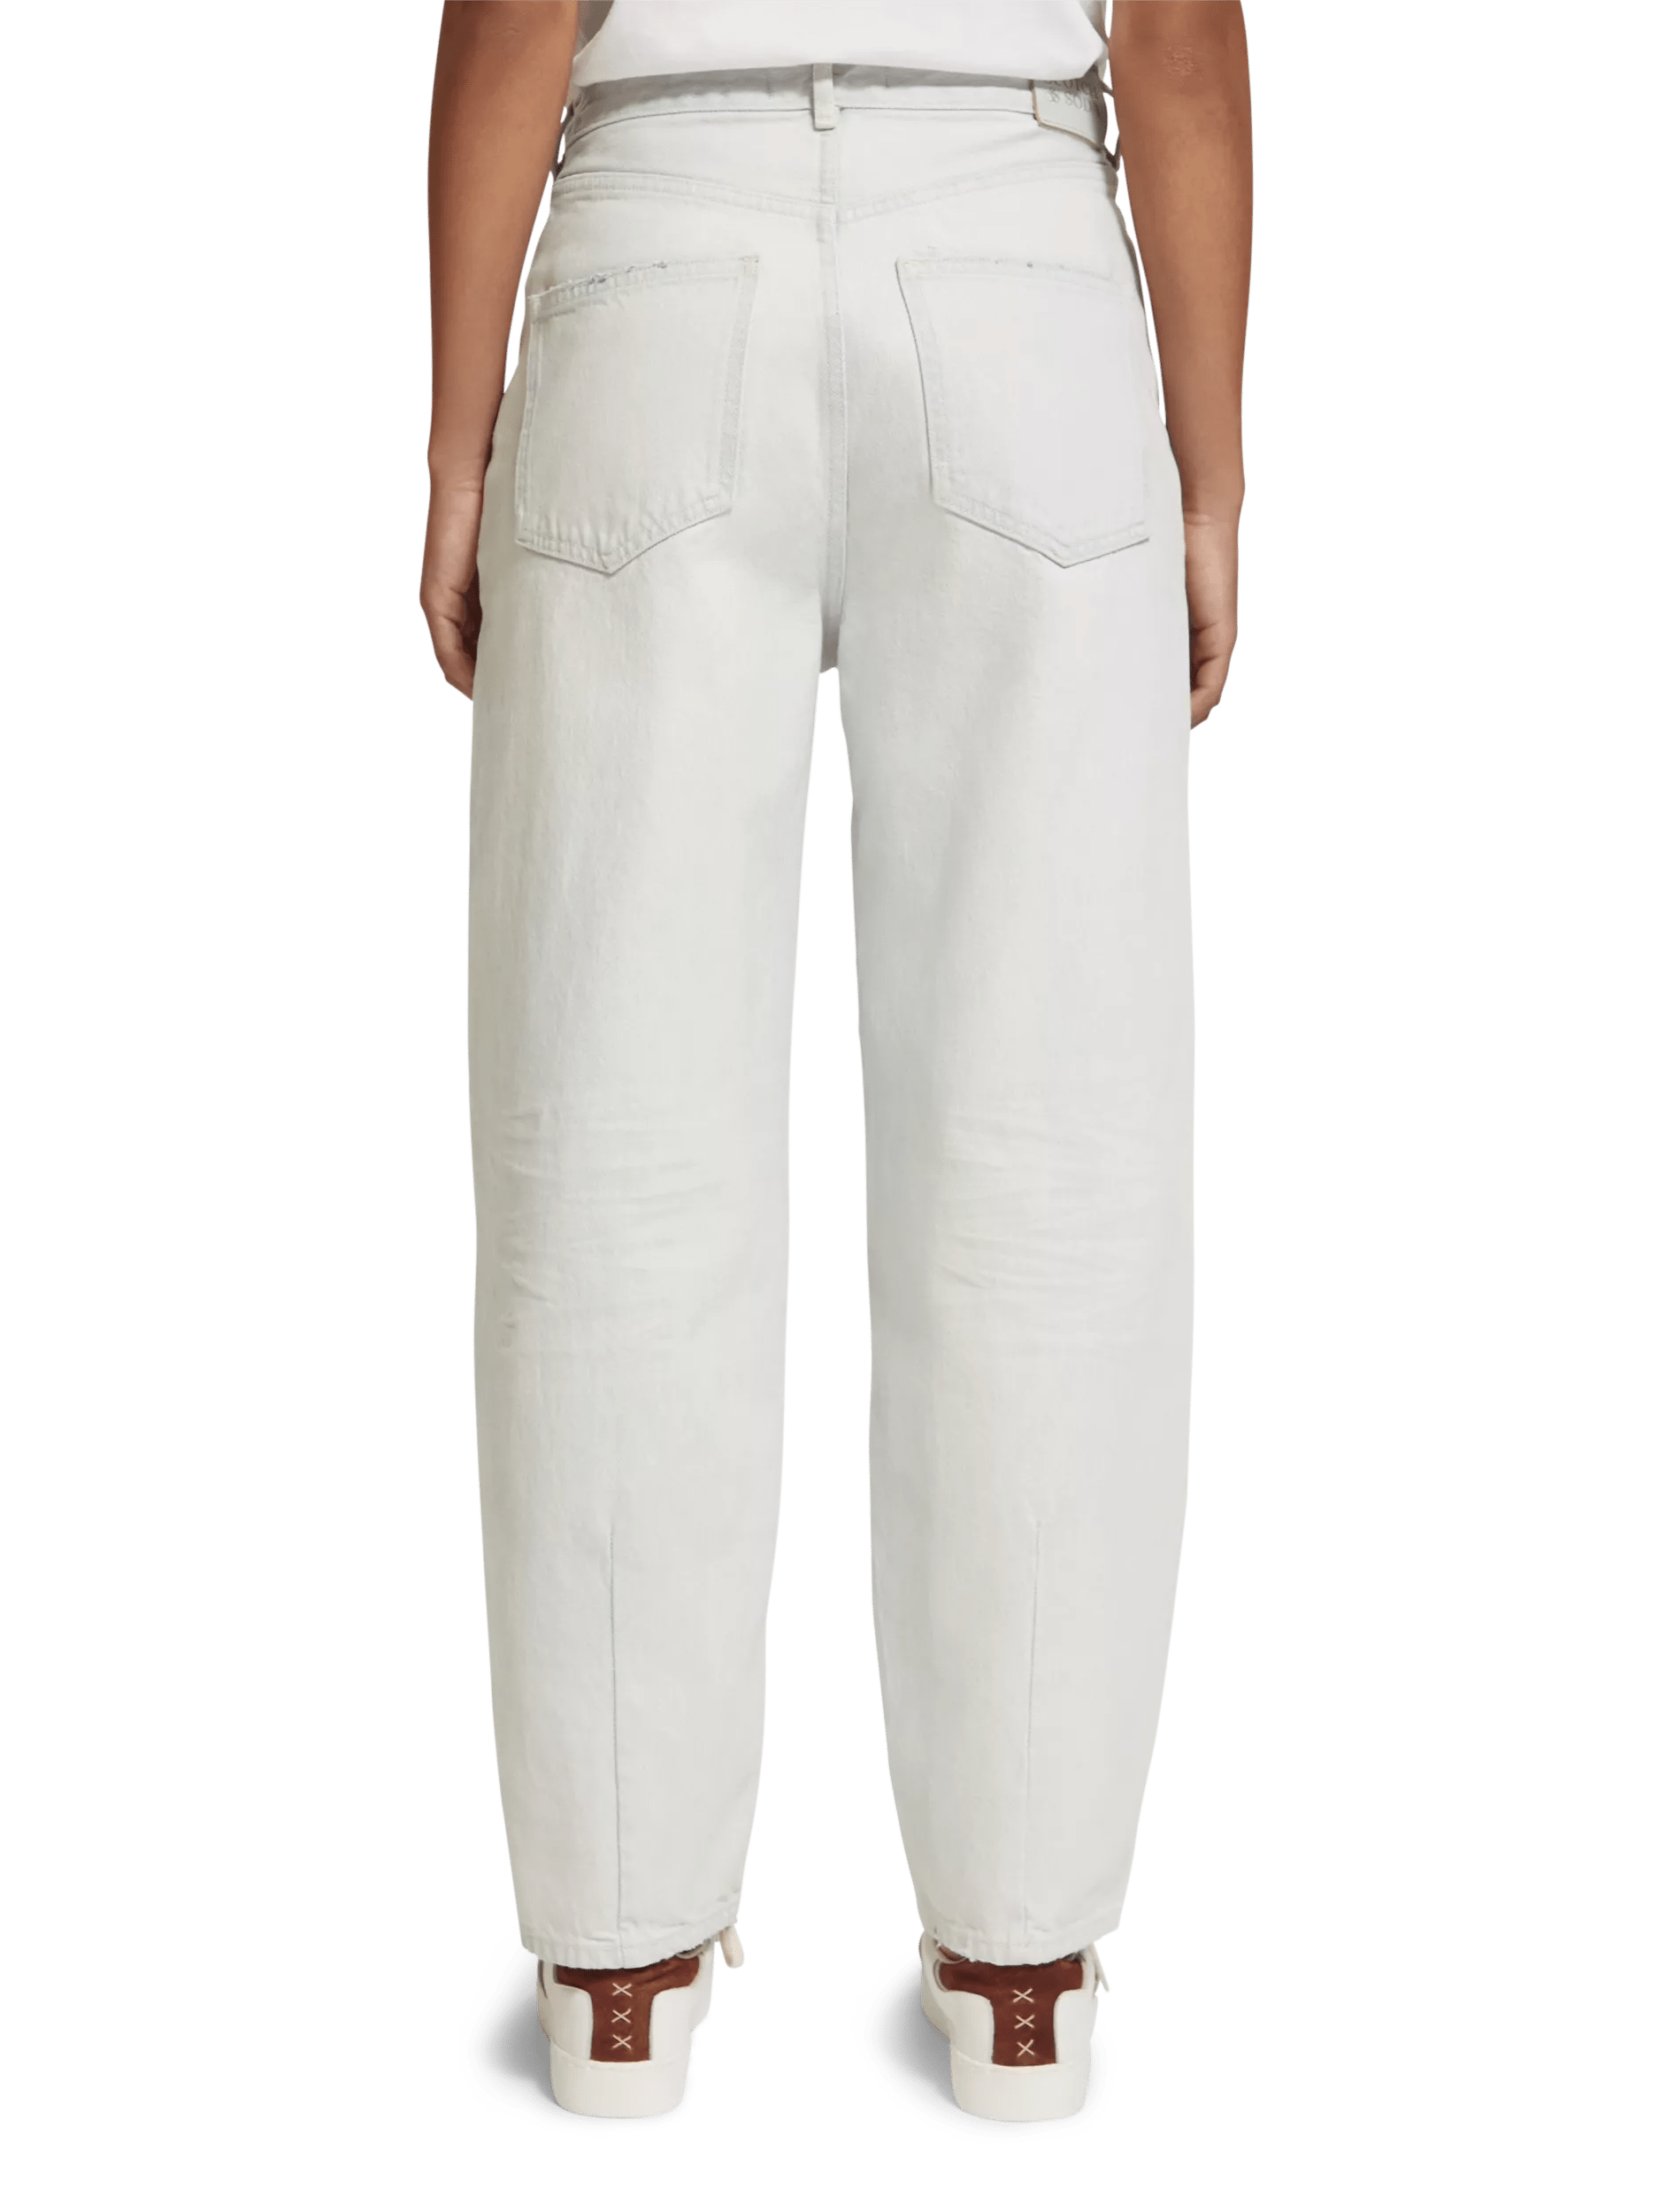 Scotch & Soda The Tide high-rise balloon fit jeans FIT-BCK